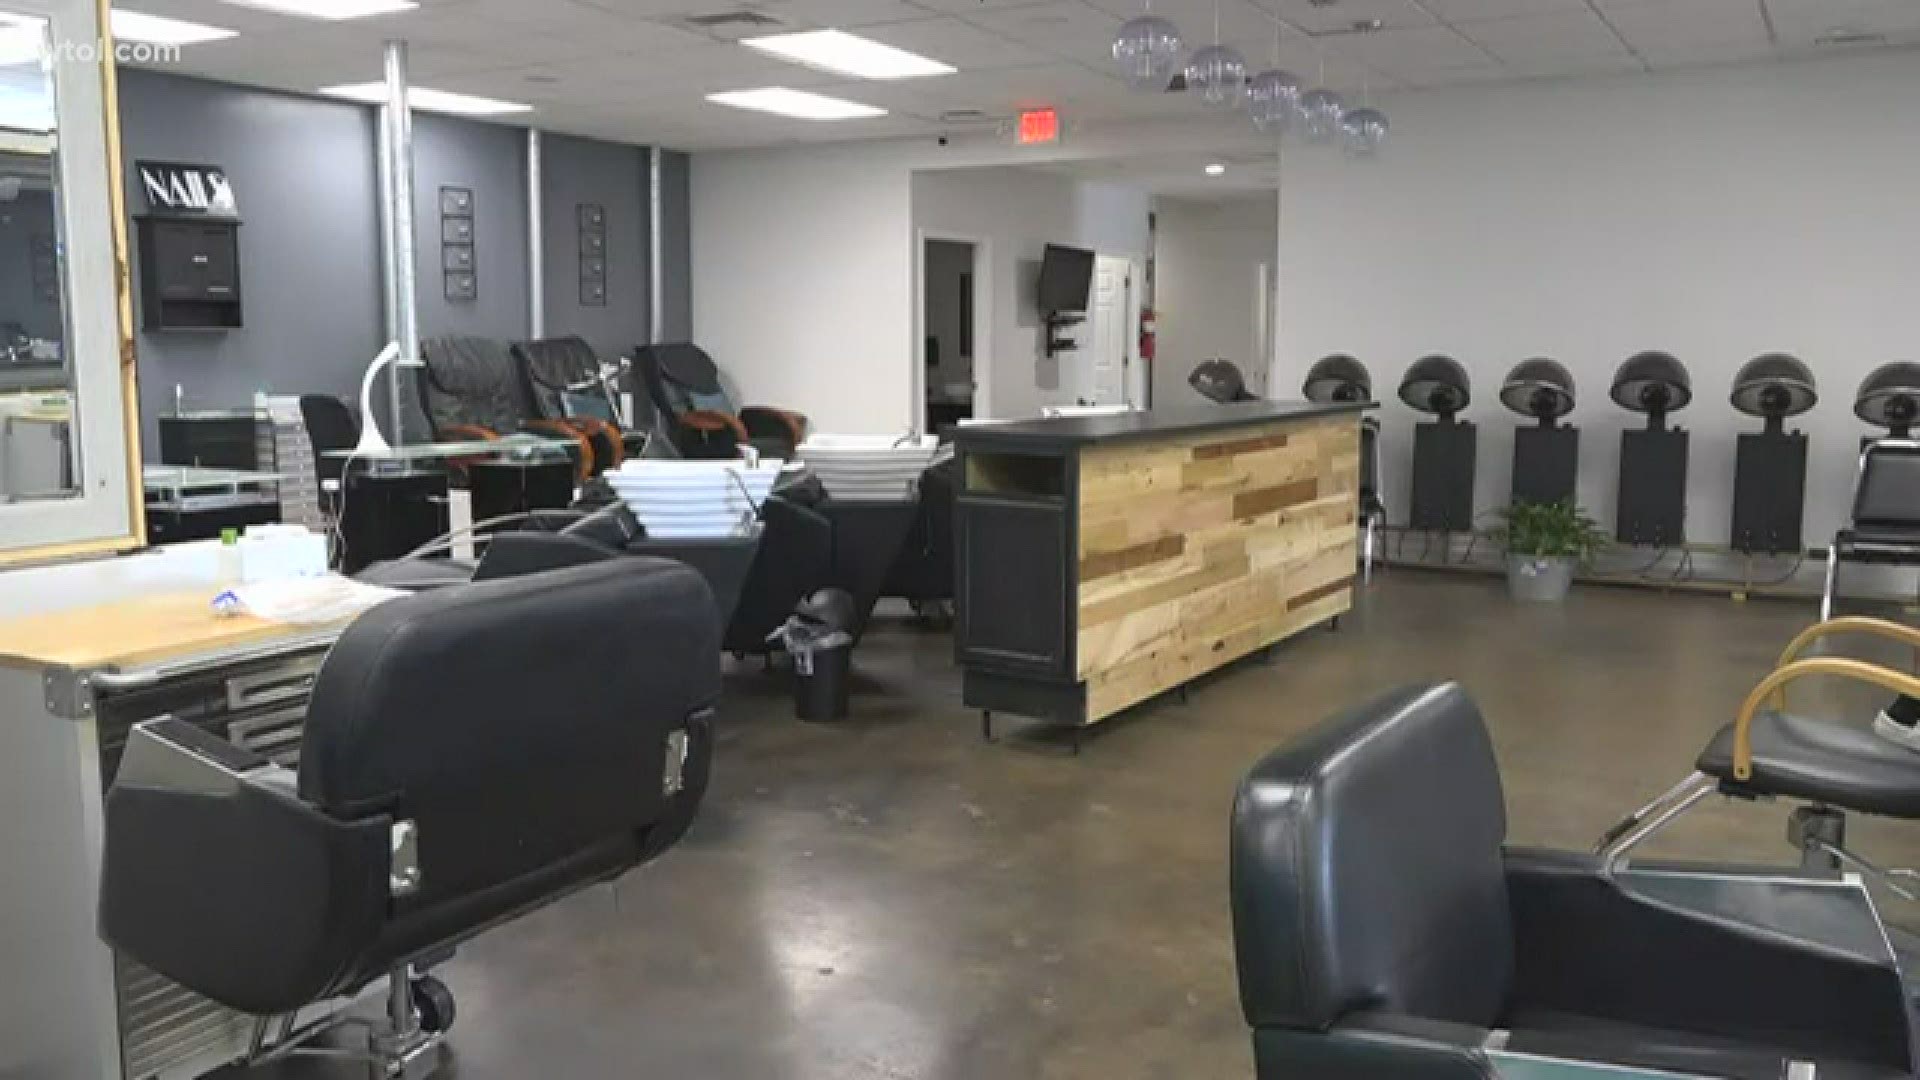 Studio 3•2• NINE Salon Suites & Spa says it's employees and clients believe it's an essential business because it brings normalcy to their lives.